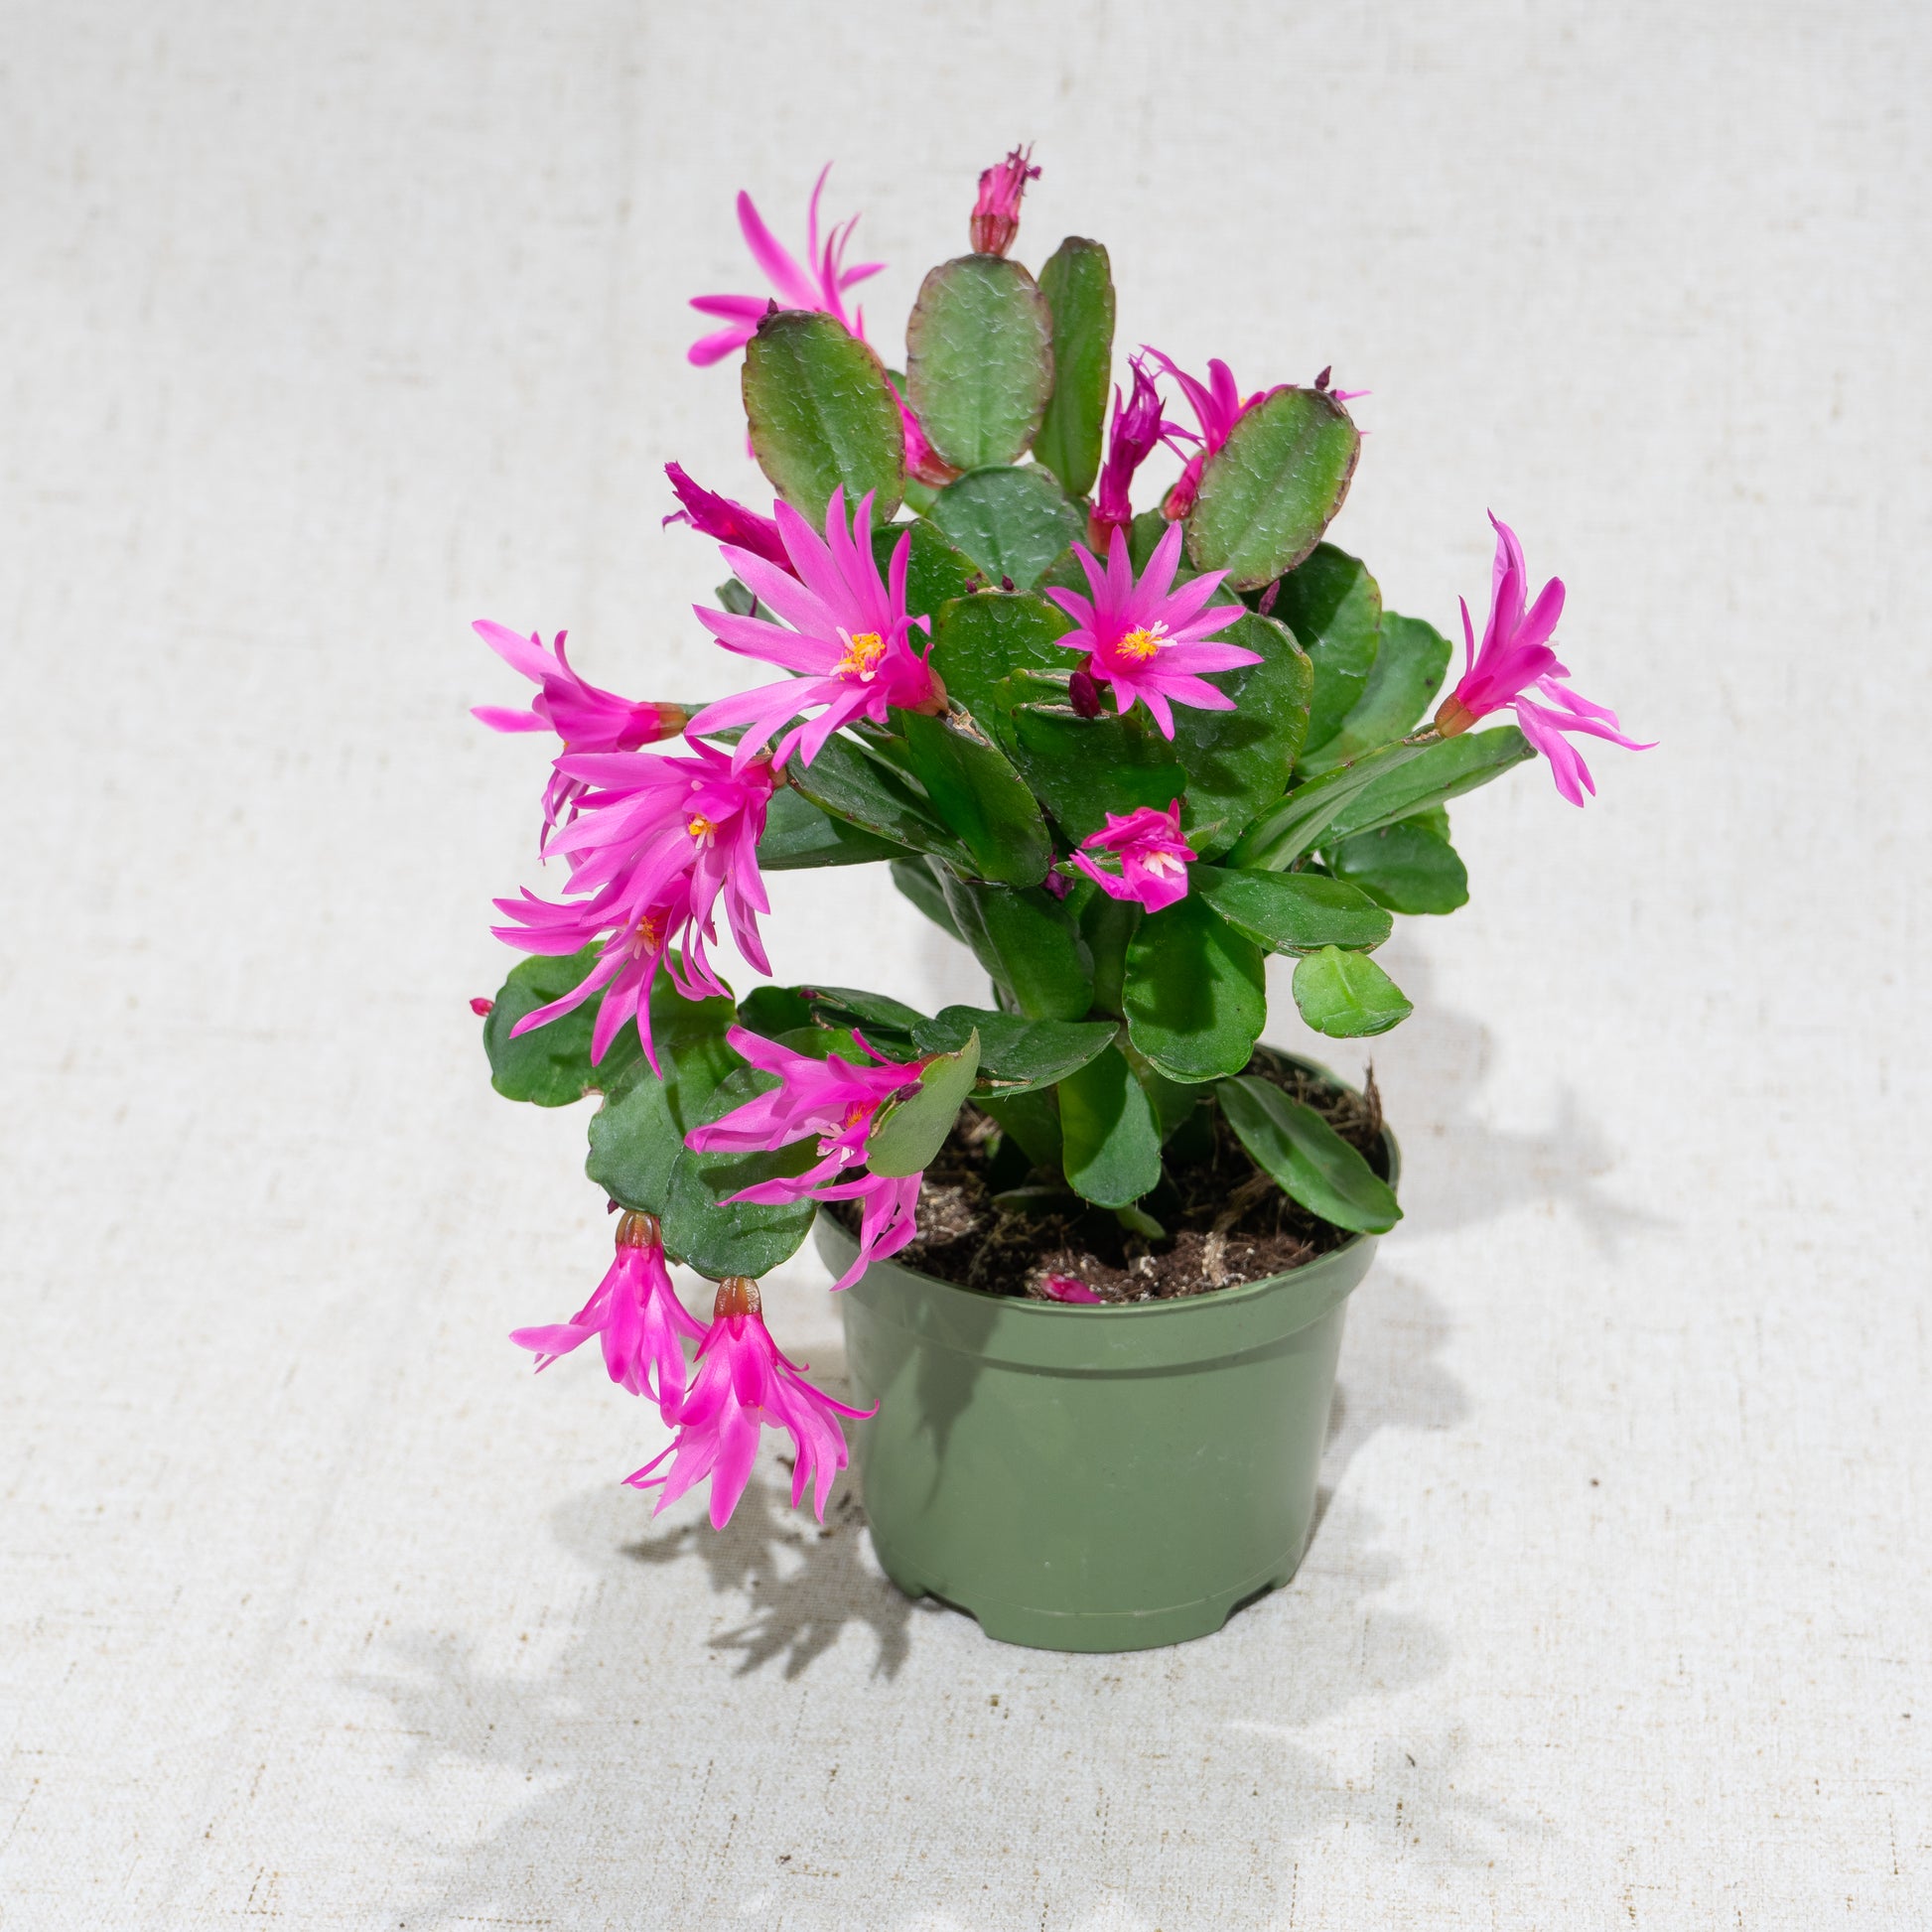 Spring Flowering Cactus (Schlumbergera bridgesii) in a 4 inch pot. Indoor plant for sale by Promise Supply for delivery and pickup in Toronto